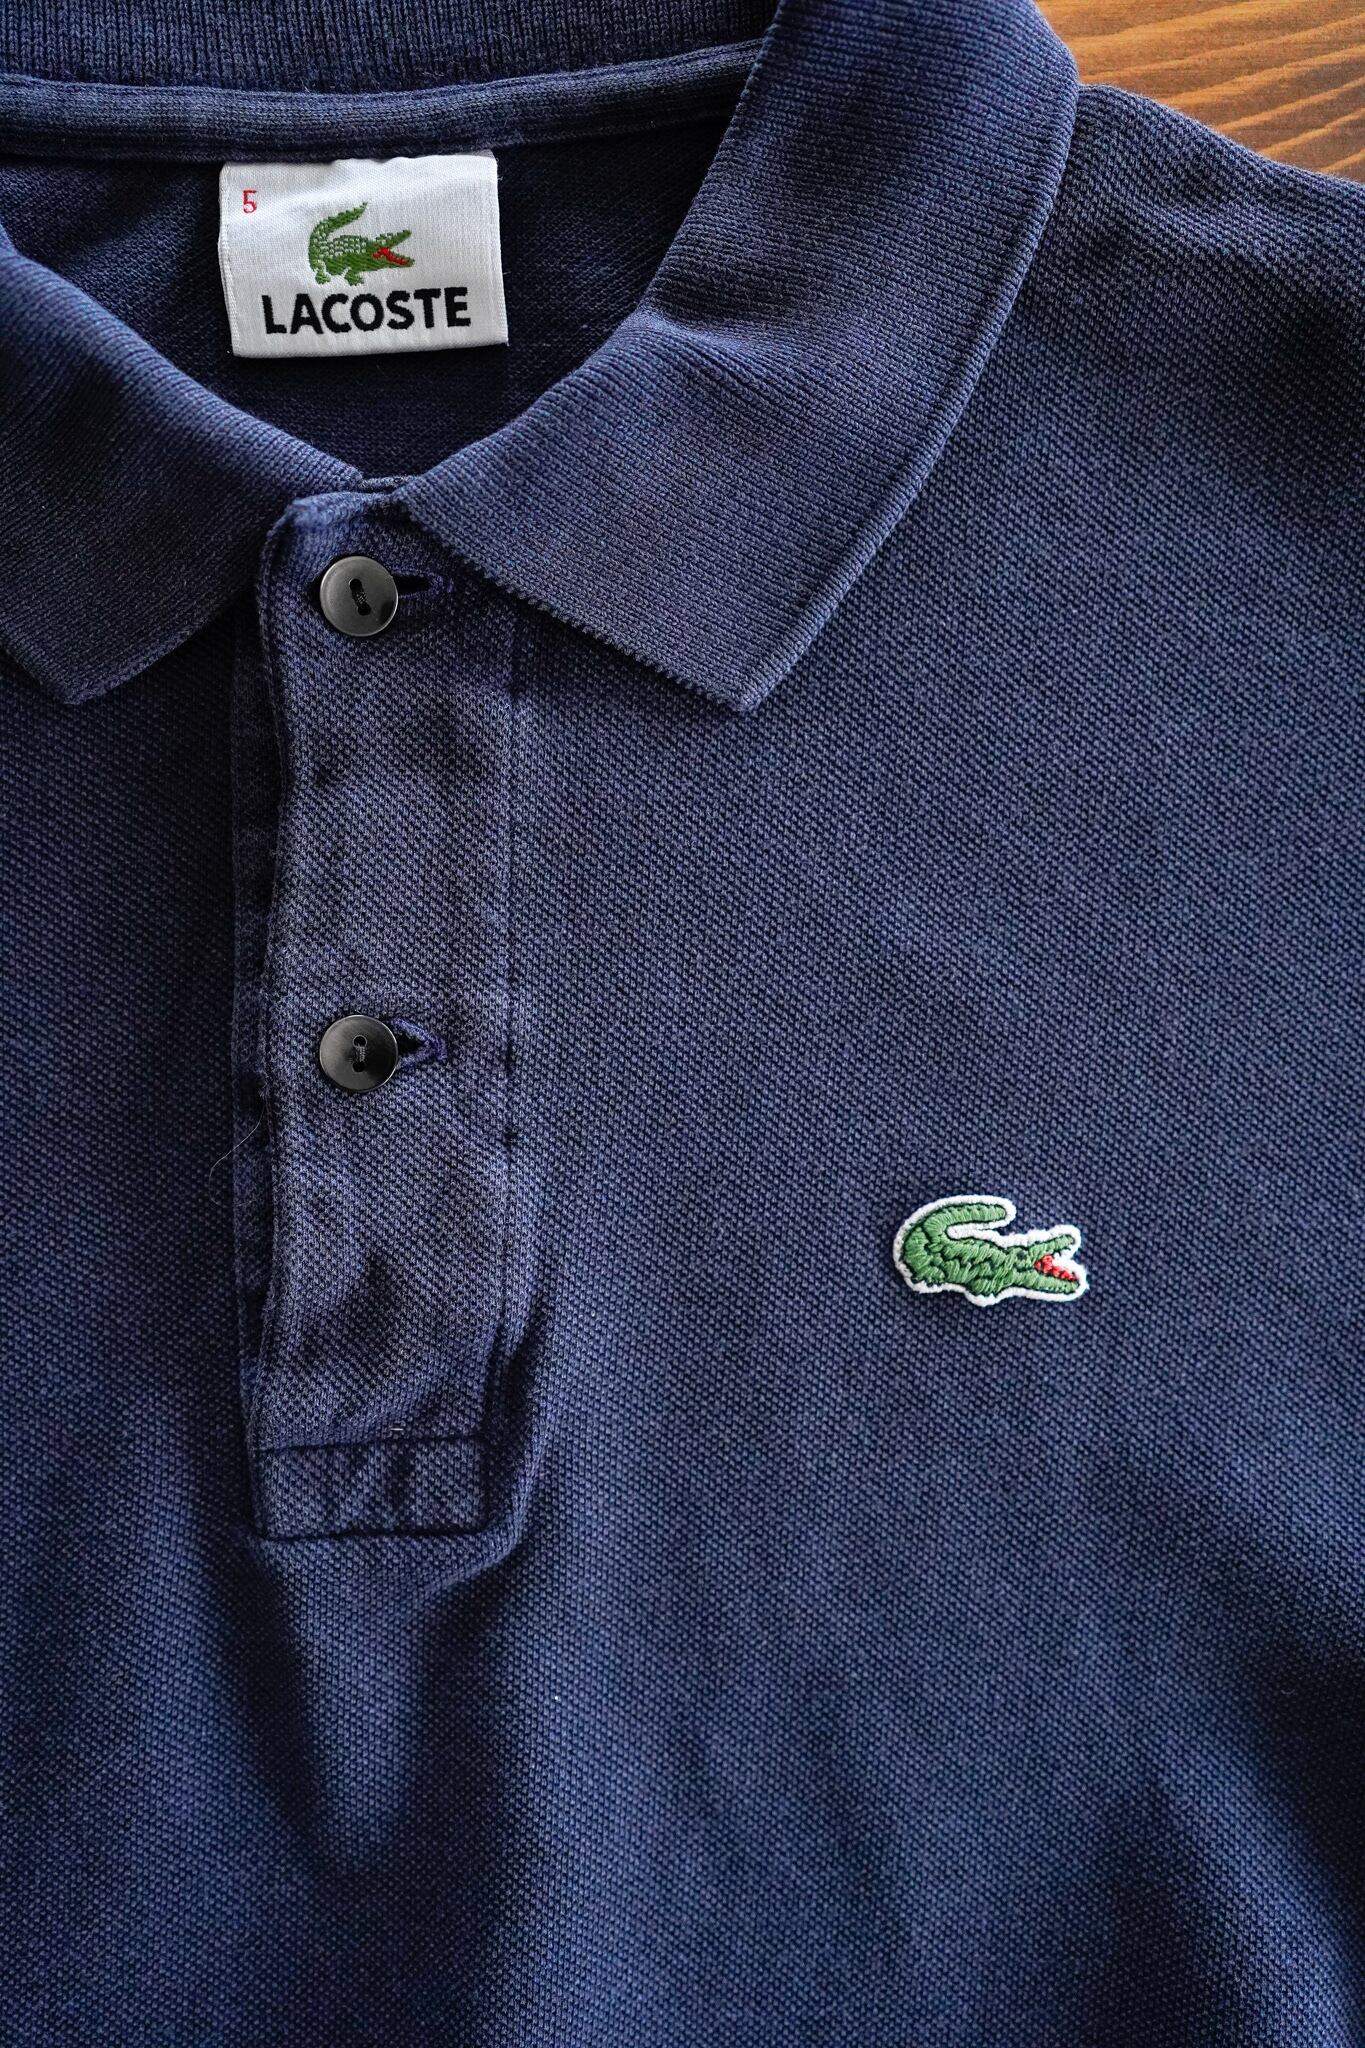 【1990s】"CHEMISE LACOSTE" Seed Stitch L/S Polo Shirts , Long Sleeve size5 / 216m